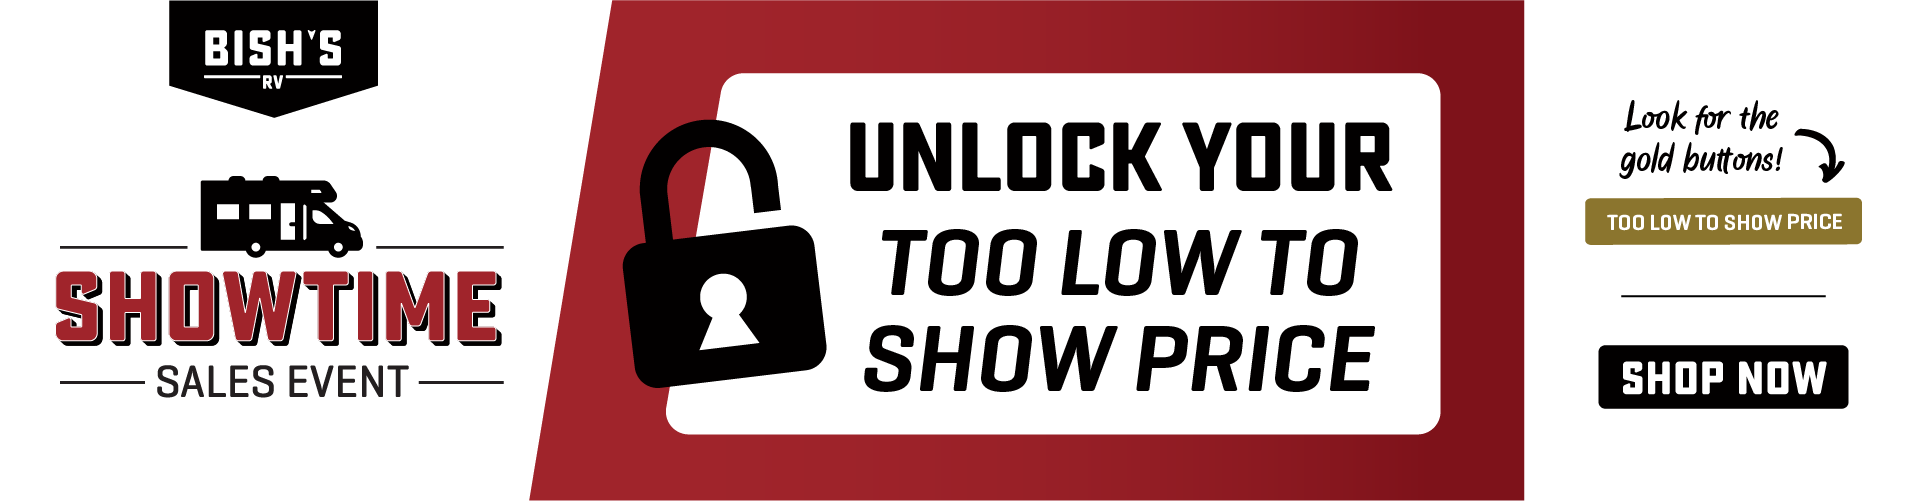 Showtime Sales Event - Unlock your Too Low To Show Price